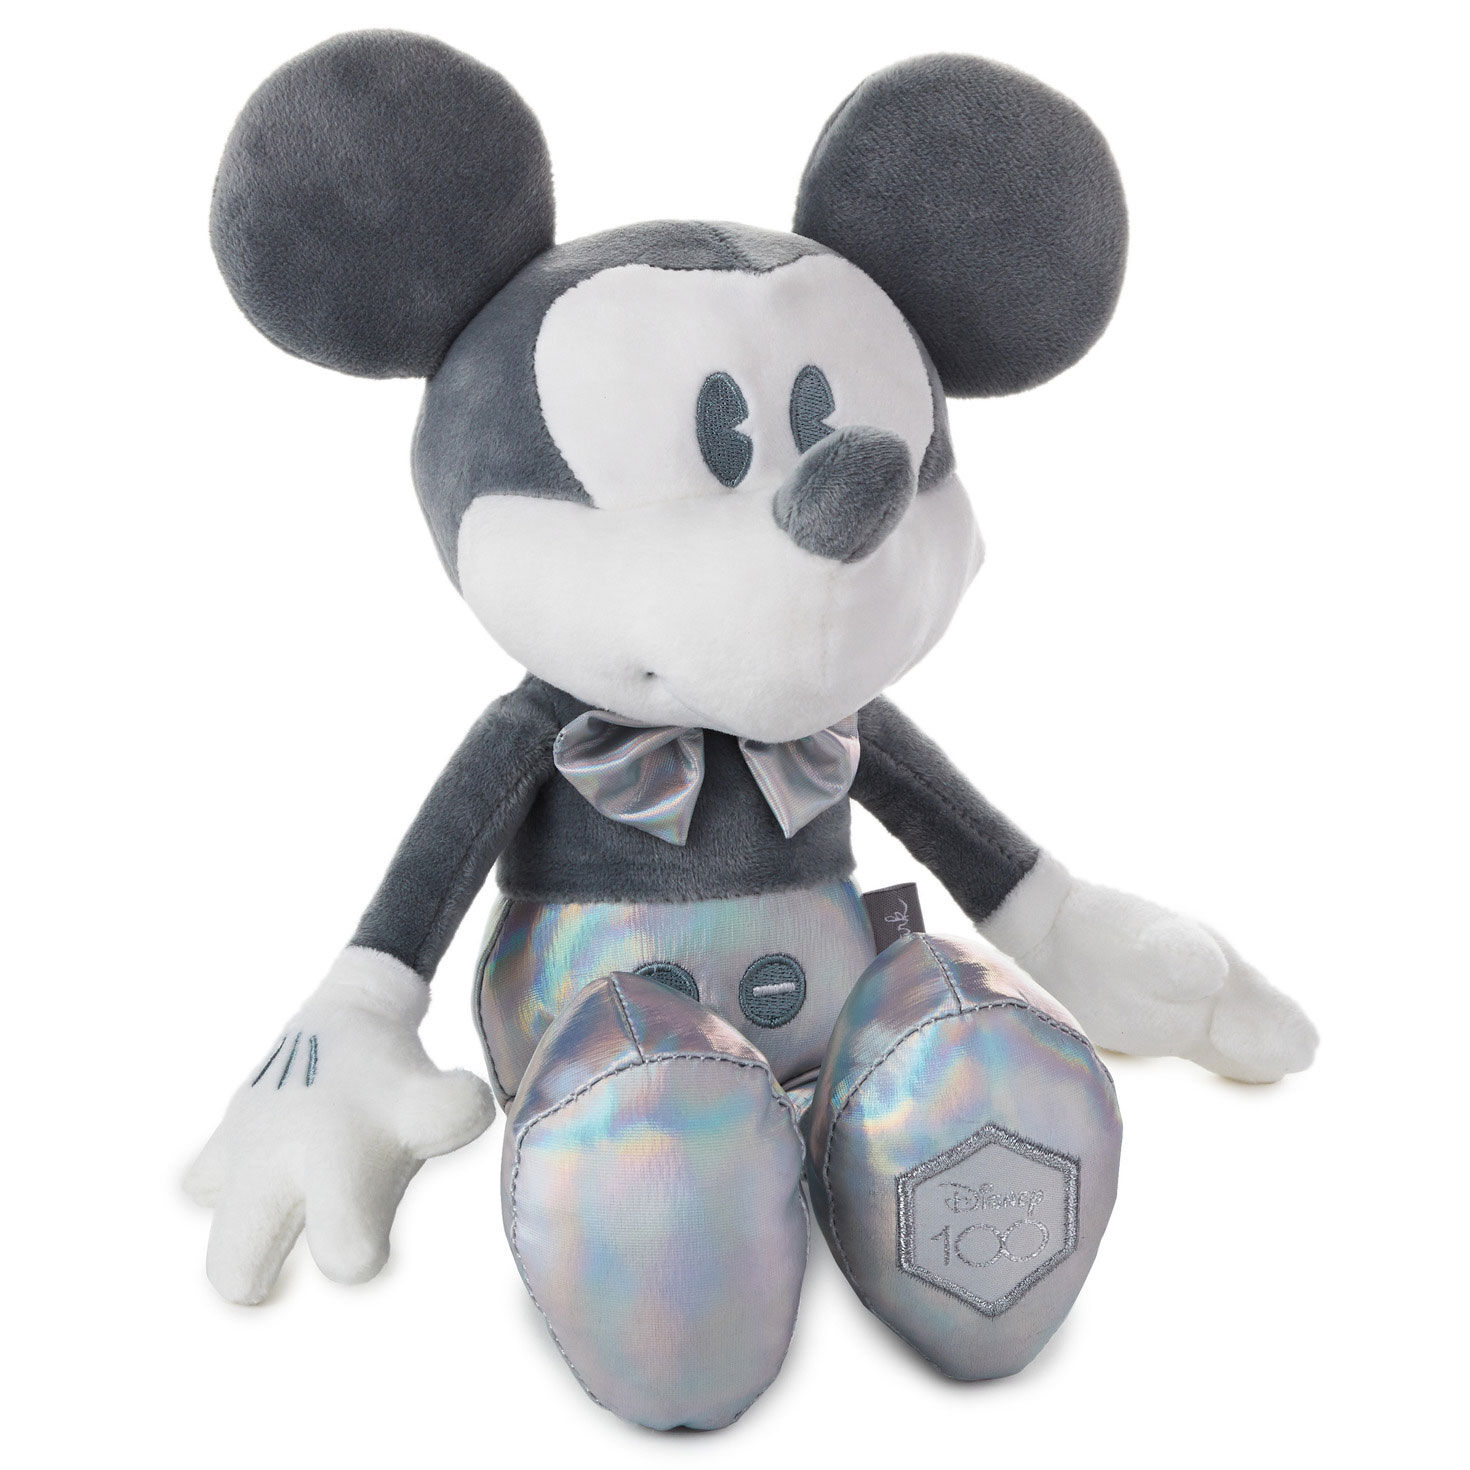 UNIQUE New Disney Parks NO VALUE Gift Card Minnie Gifts Mickey